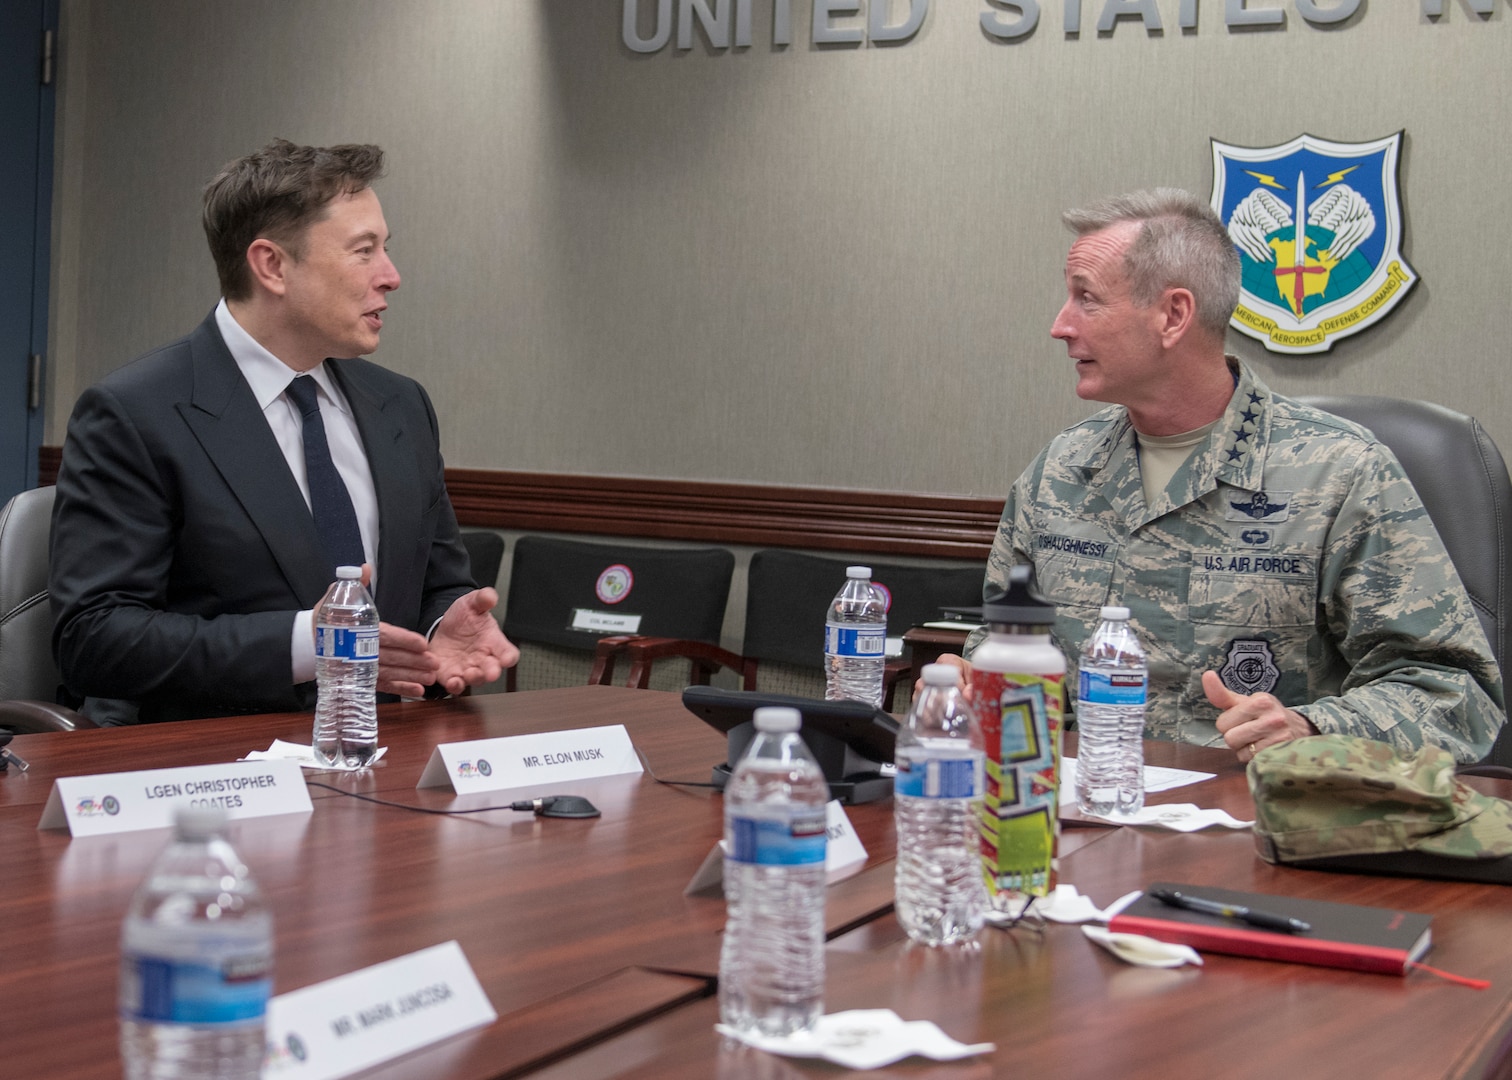 SpaceX CEO Elon Musk discusses U.S. space operations with U.S. Air Force General Terrence O’Shaughnessy, the Commander of the North American Aerospace Defense Command and U.S. Northern Command, April 15, 2019. During Musk’s visit to Colorado Springs, Colorado he participated in conversations and round table briefings about future space operations and homeland defense innovation.